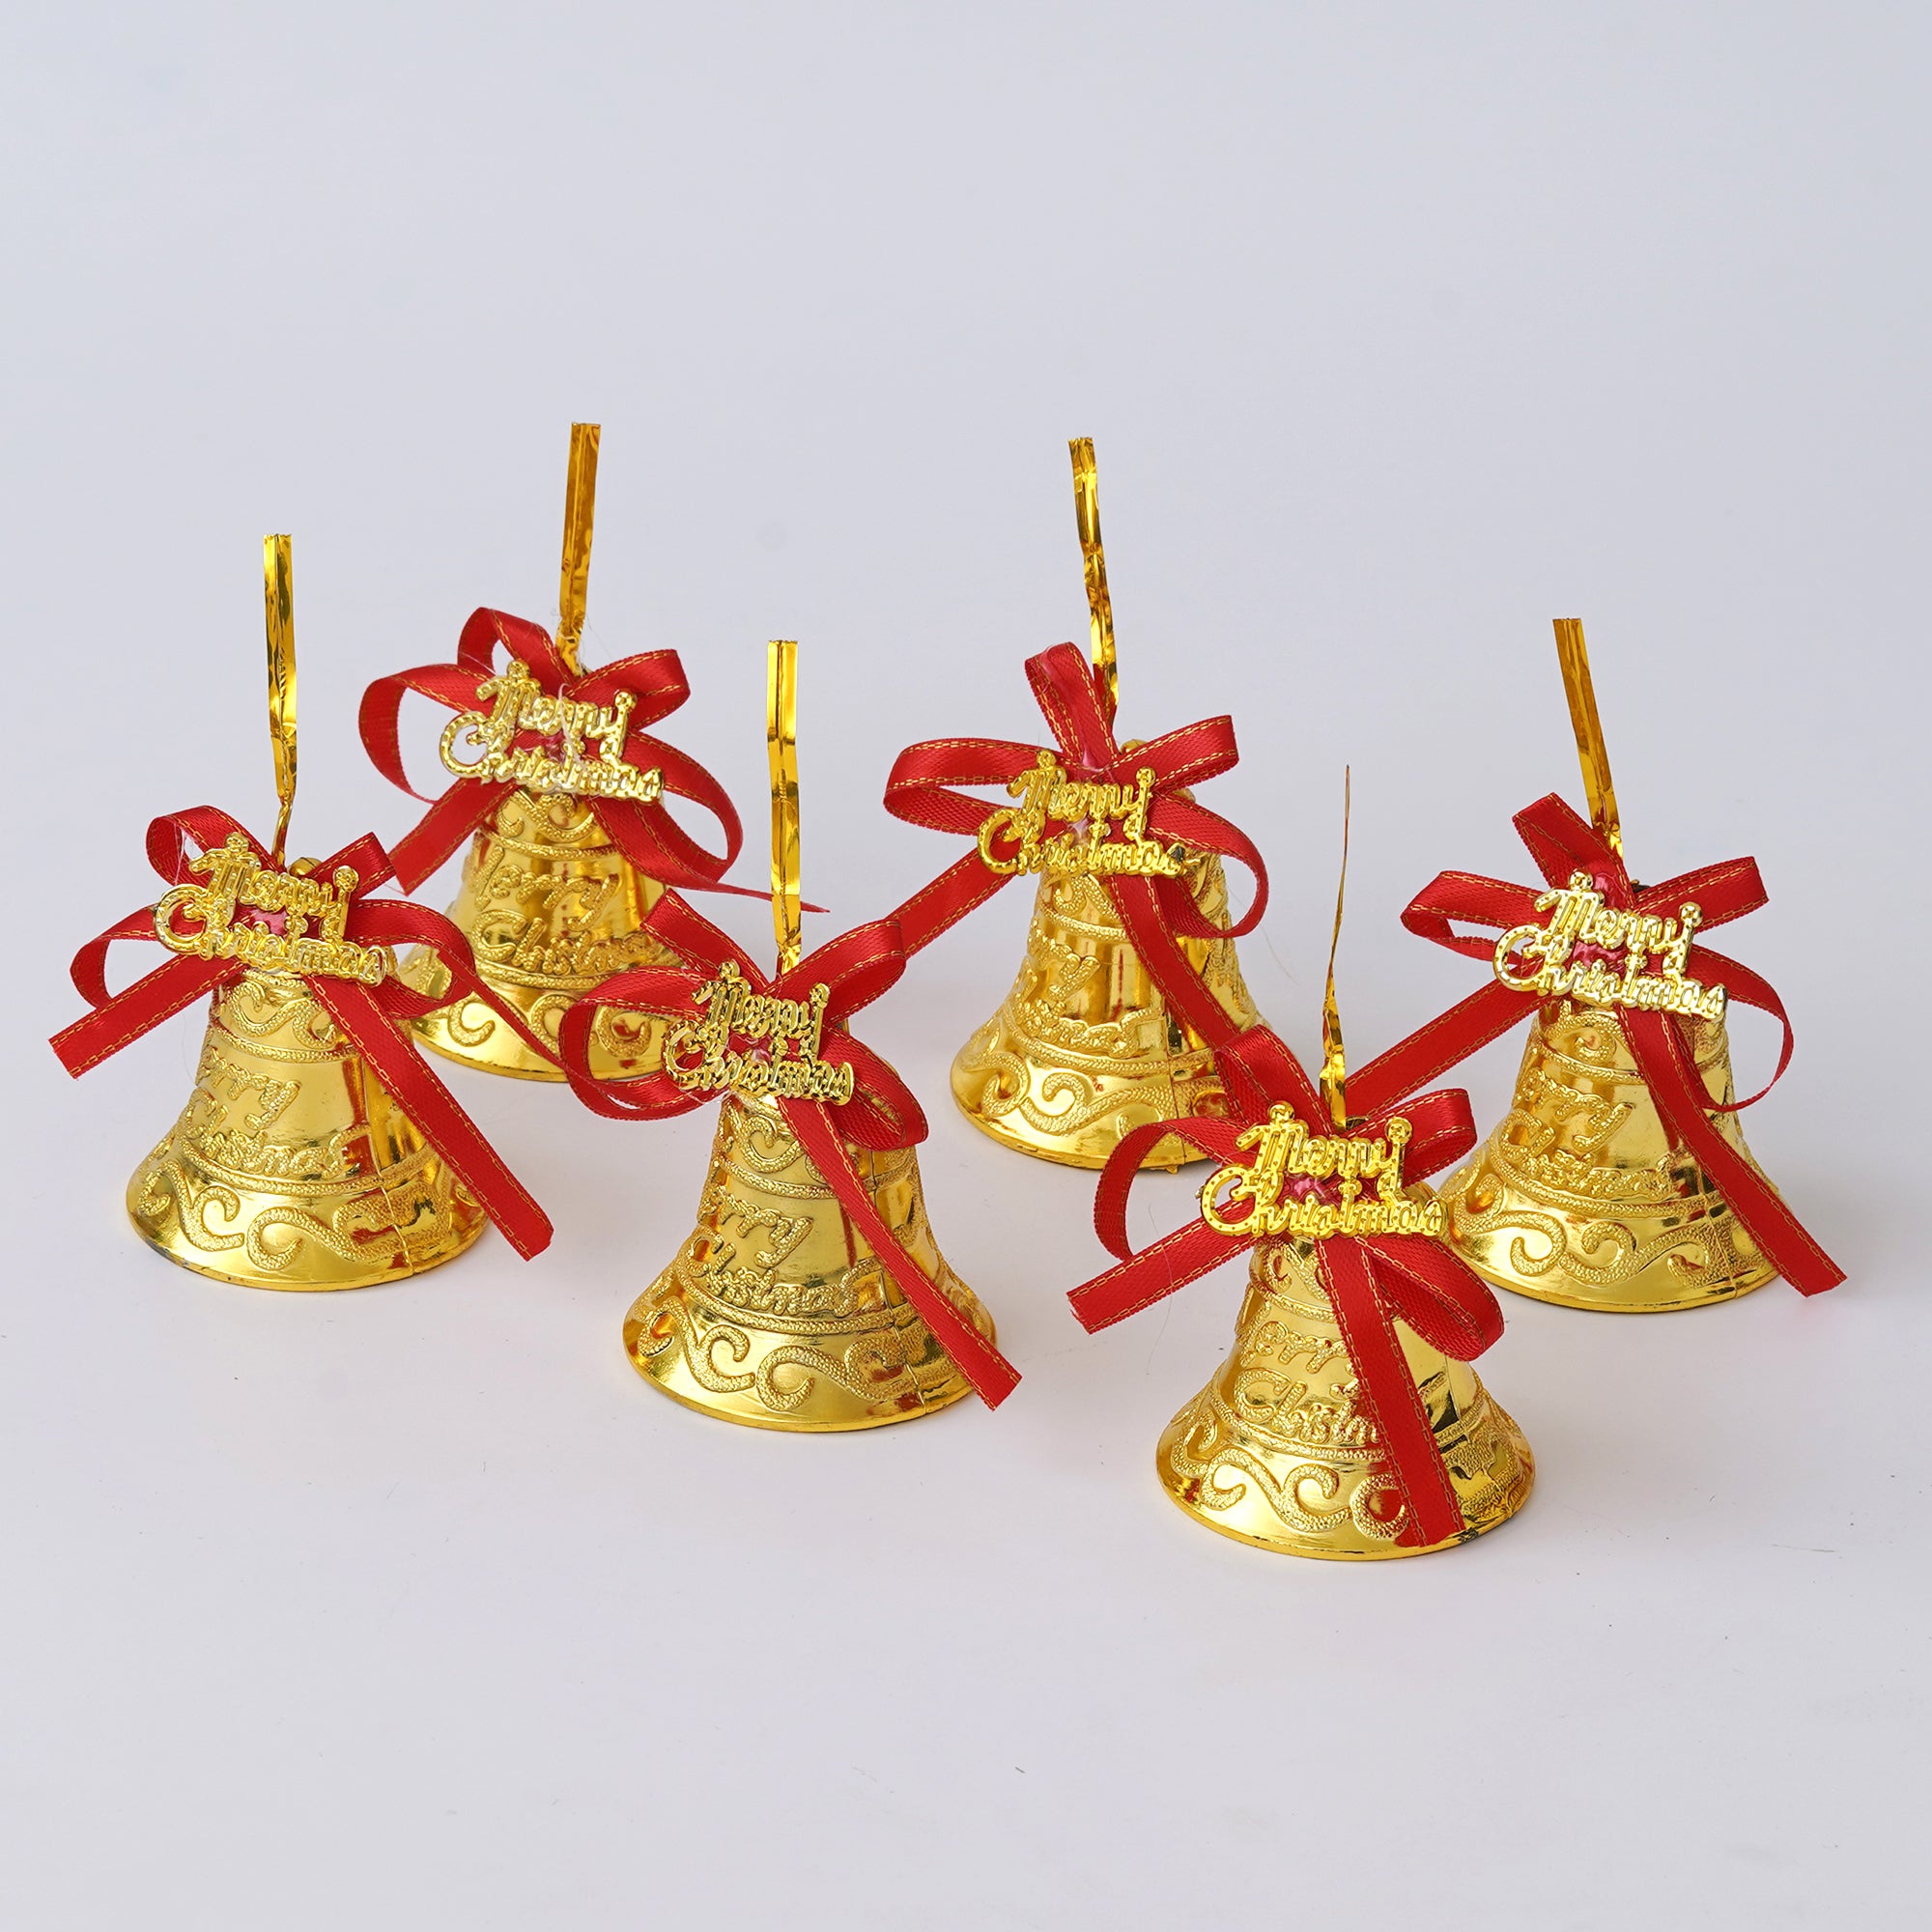 eCraftIndia Set of 6 Merry Christmas Golden Bells with Red Ribbon Christmas Tree Decoration  Christmas Decorations Items for Home Living Room 2